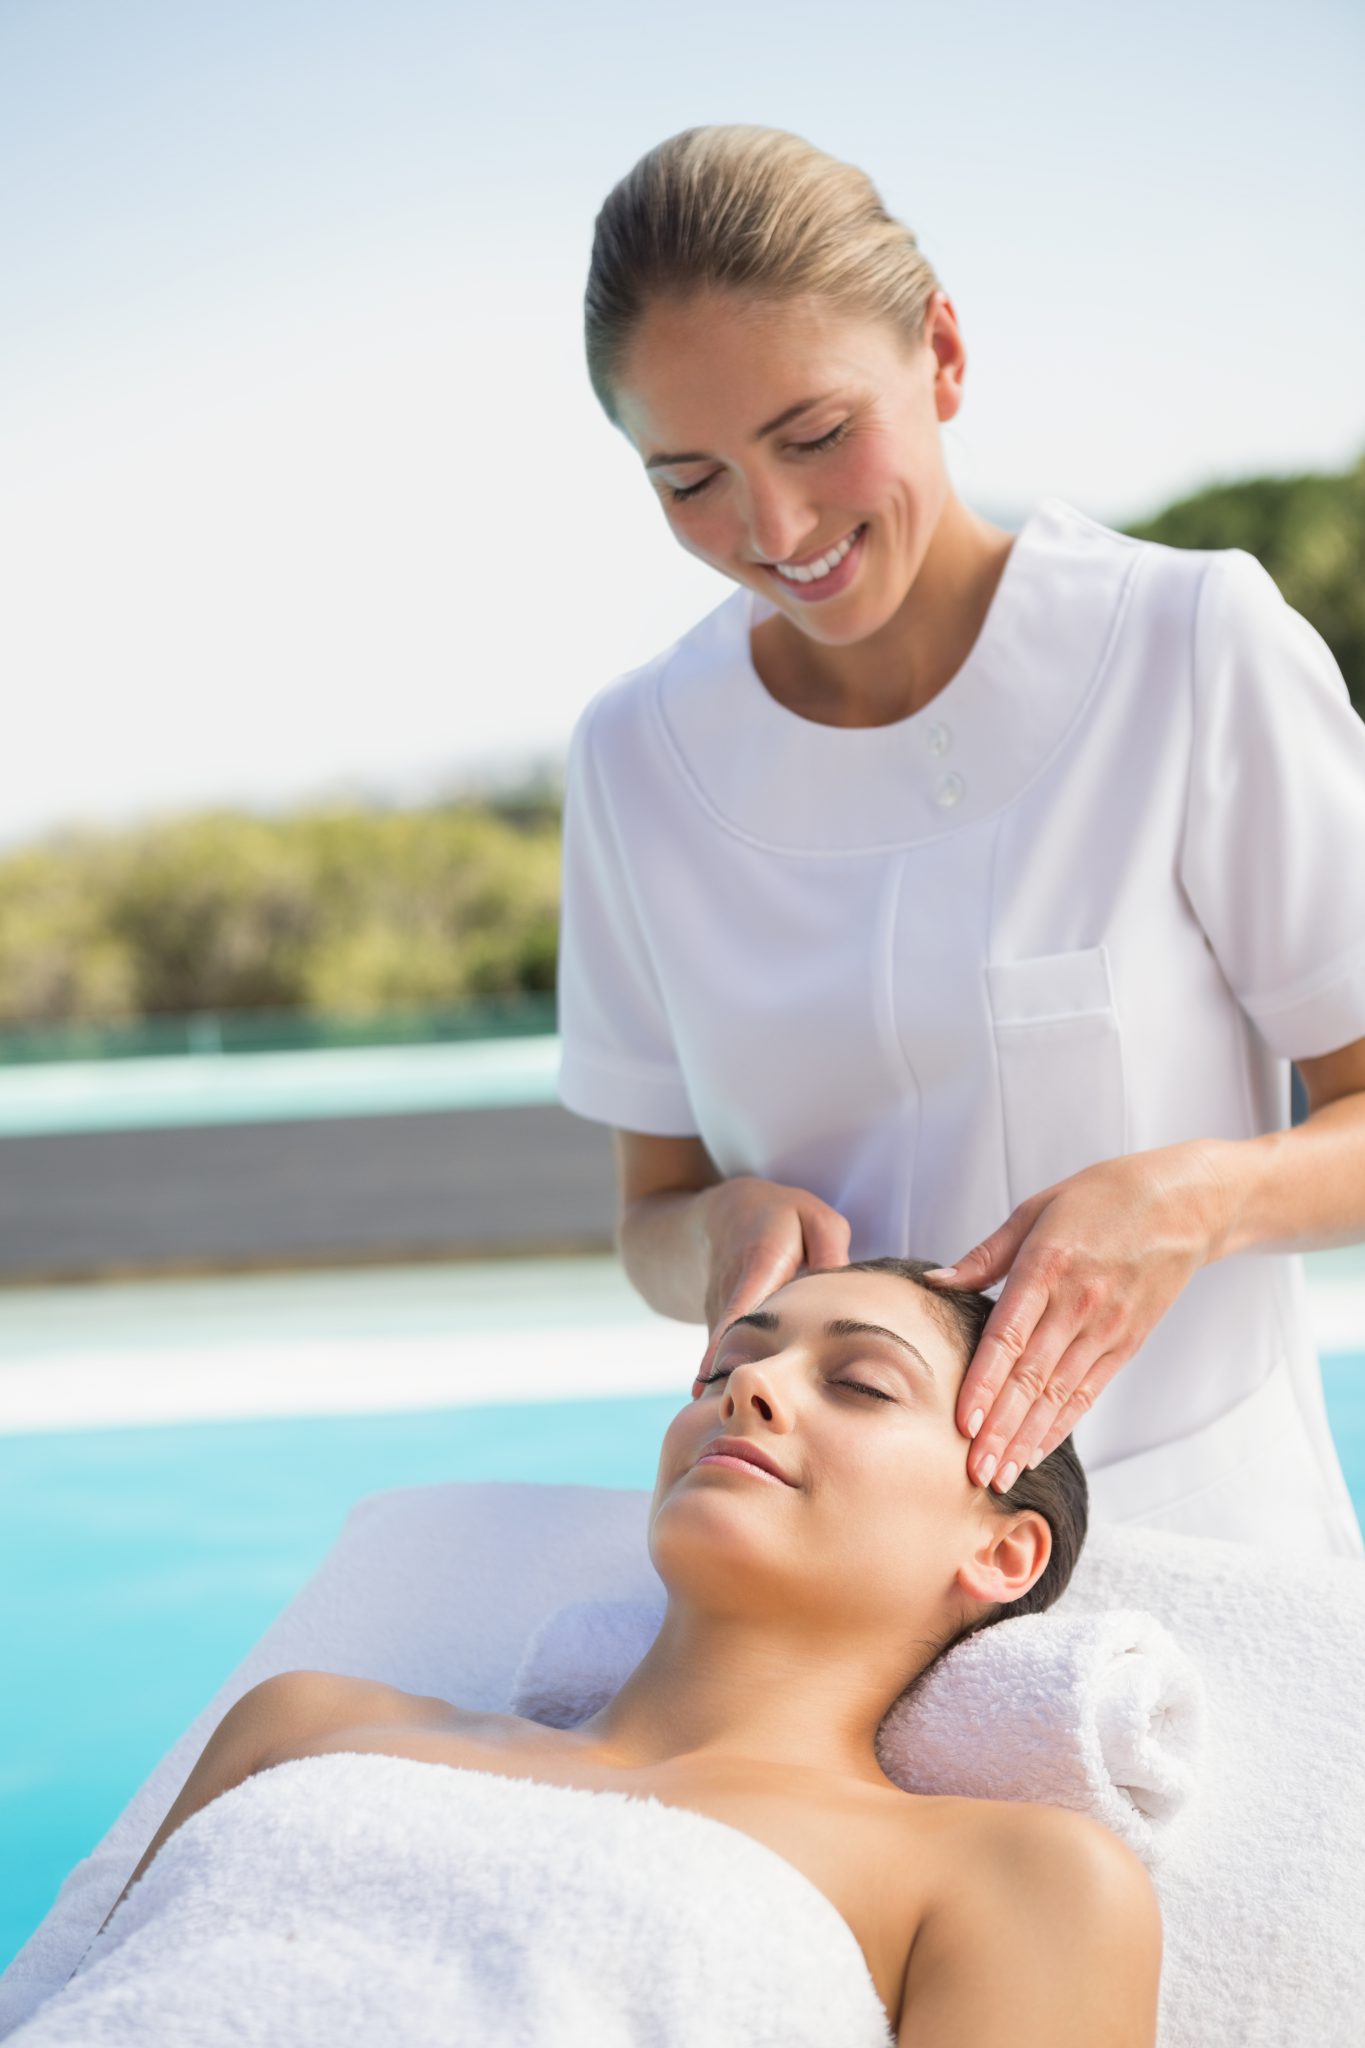 Massage Therapy Training In Baton Rouge Medical Training College 3154